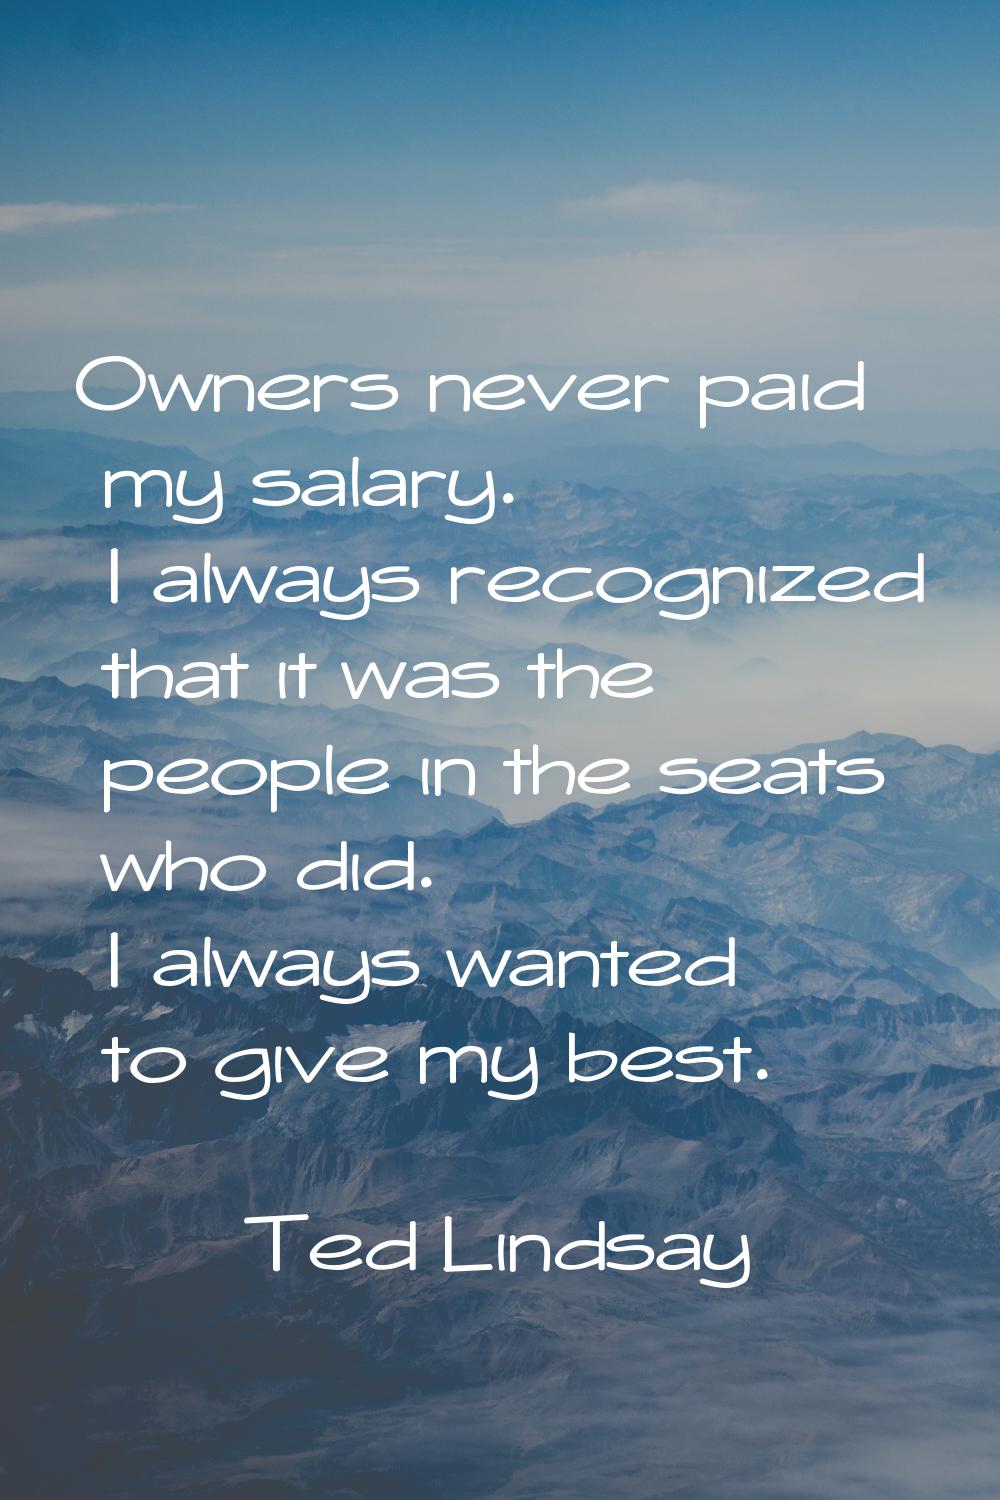 Owners never paid my salary. I always recognized that it was the people in the seats who did. I alw